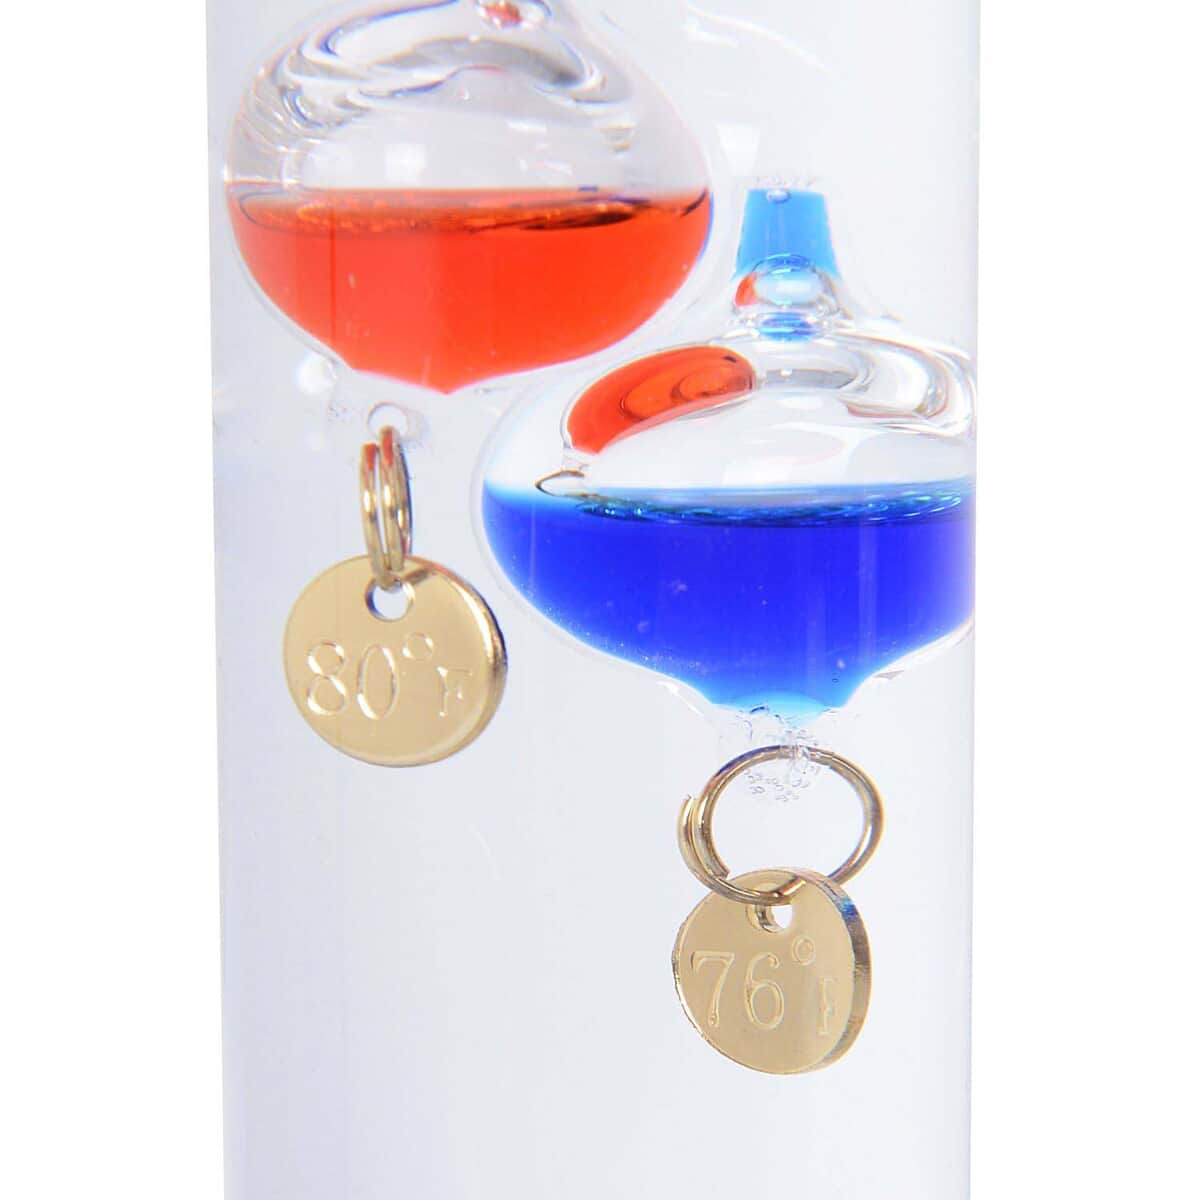 Multicolor Galileo Thermometer with Floating Balls, Weather Predictor Office Home Desk Table Decor, Indoor Decorations Gifts image number 6